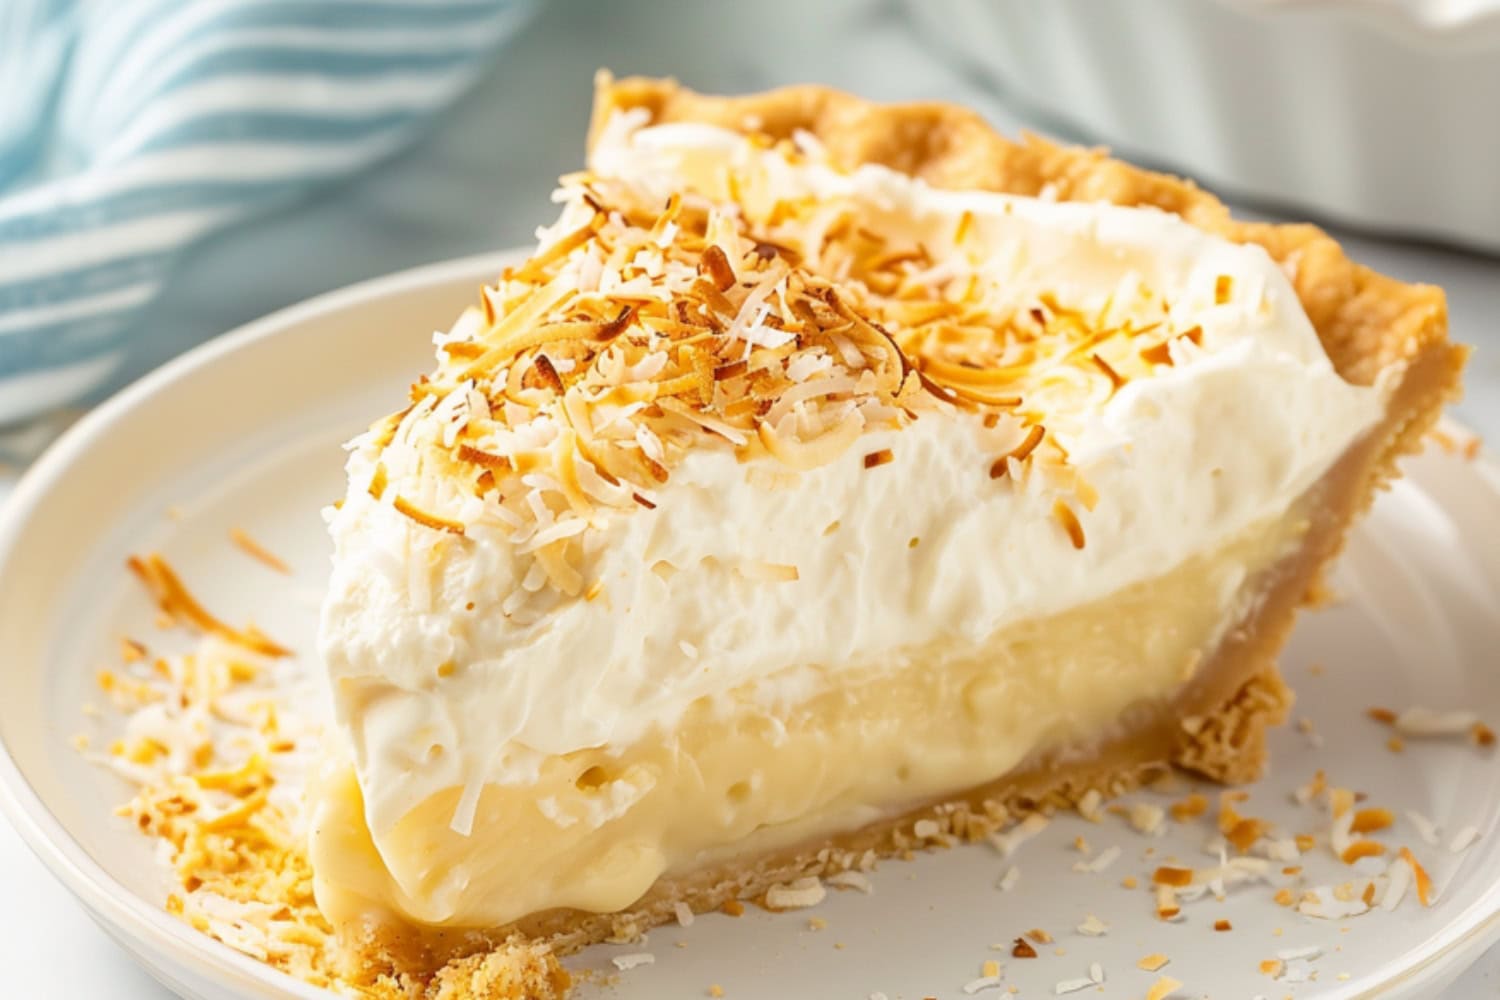 A perfect slice of coconut cream pie garnished with toasted coconut on top.